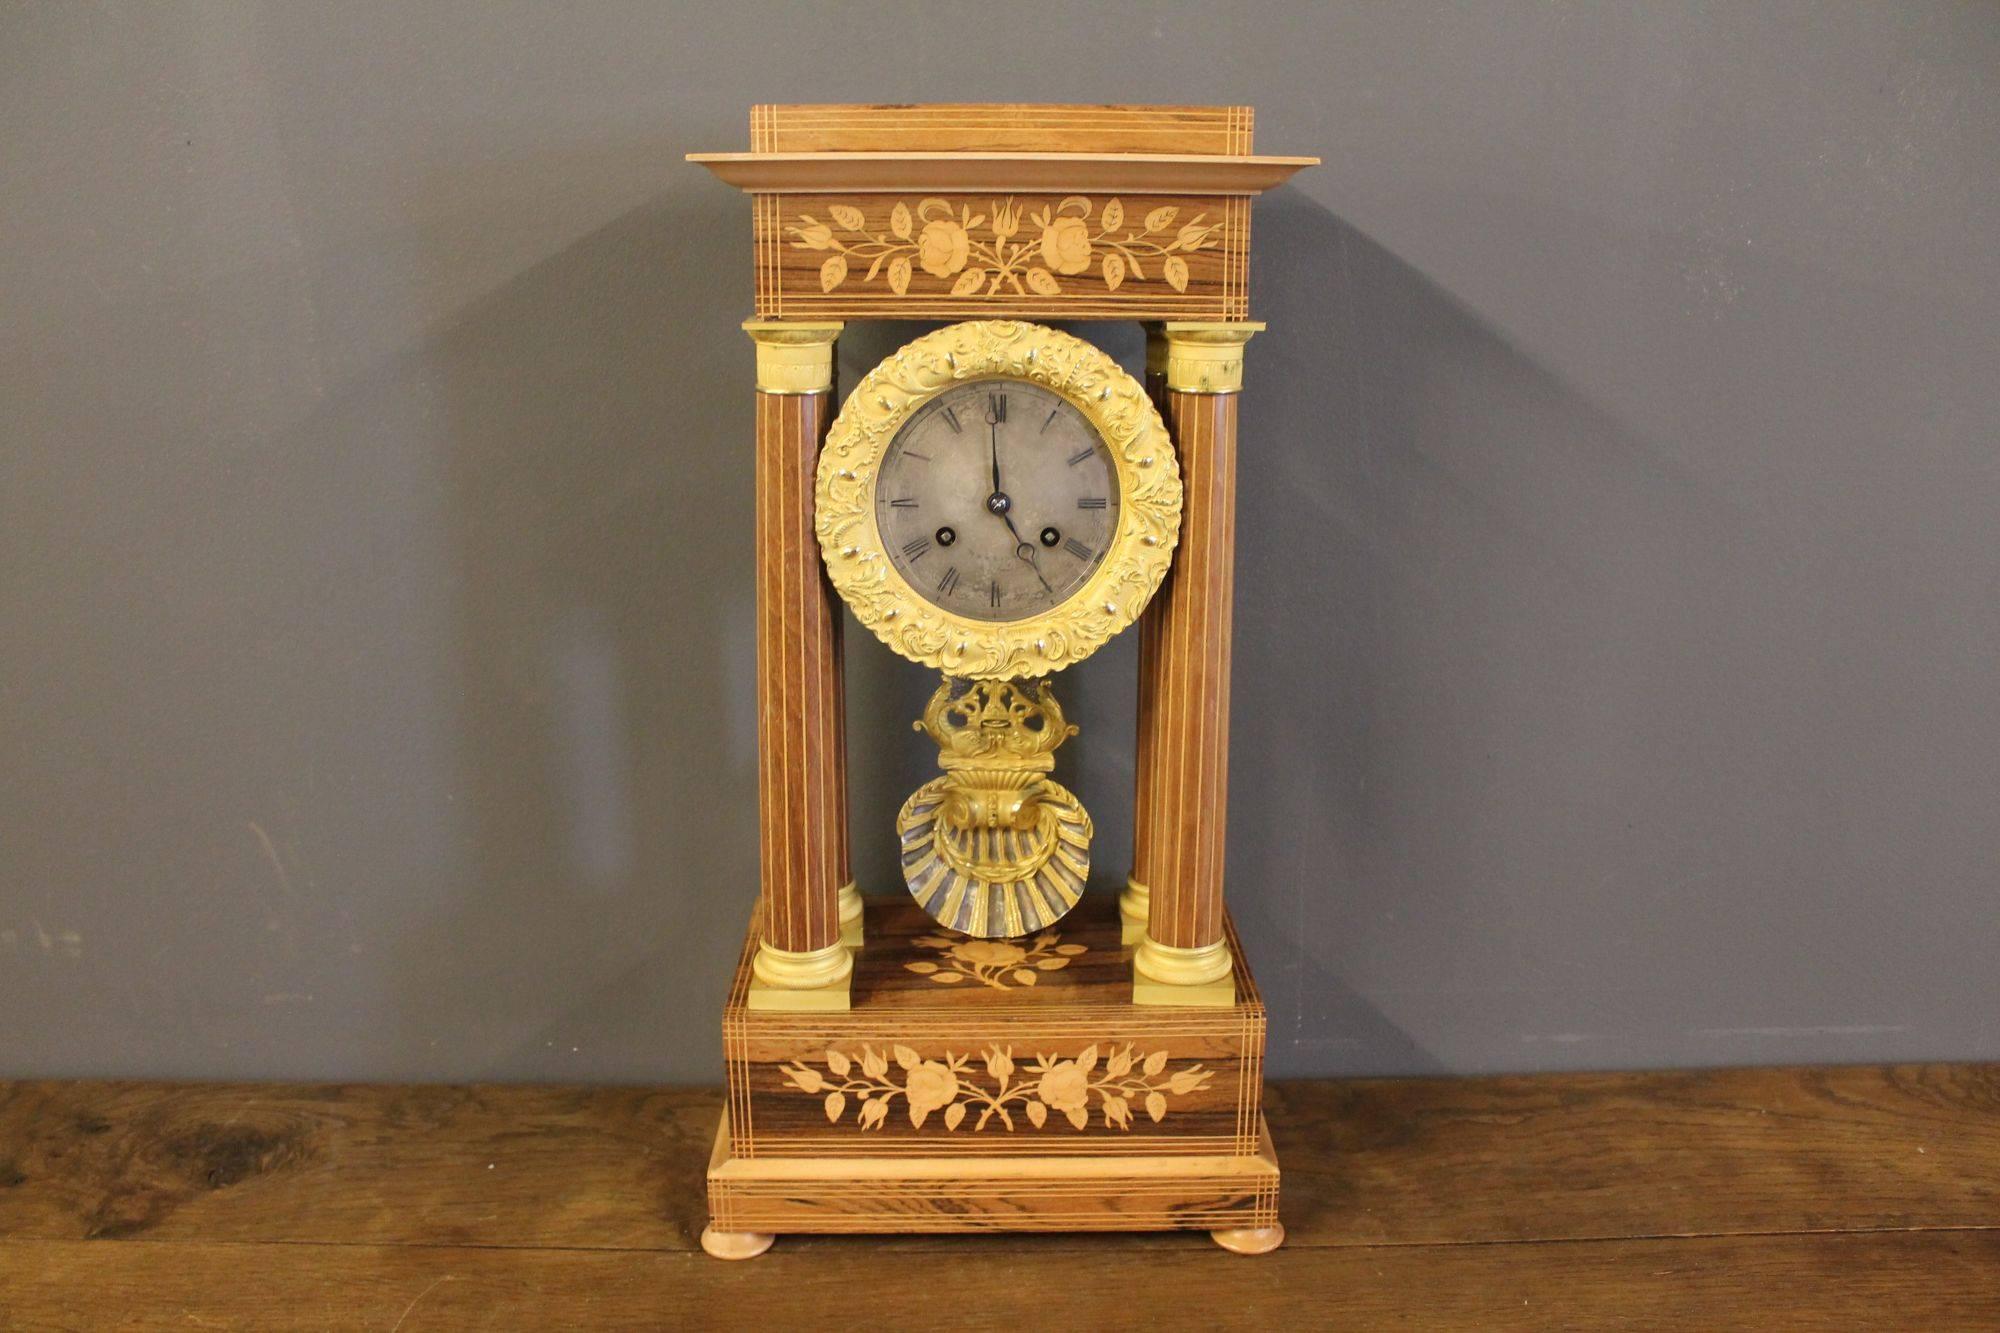 Beautiful ormolu clock in Empire style, protected under a glass dome and supported by a walnut foot. Both the body and the foot are splendidly worked with rosewood inlay. Made in France, circa 1850s.